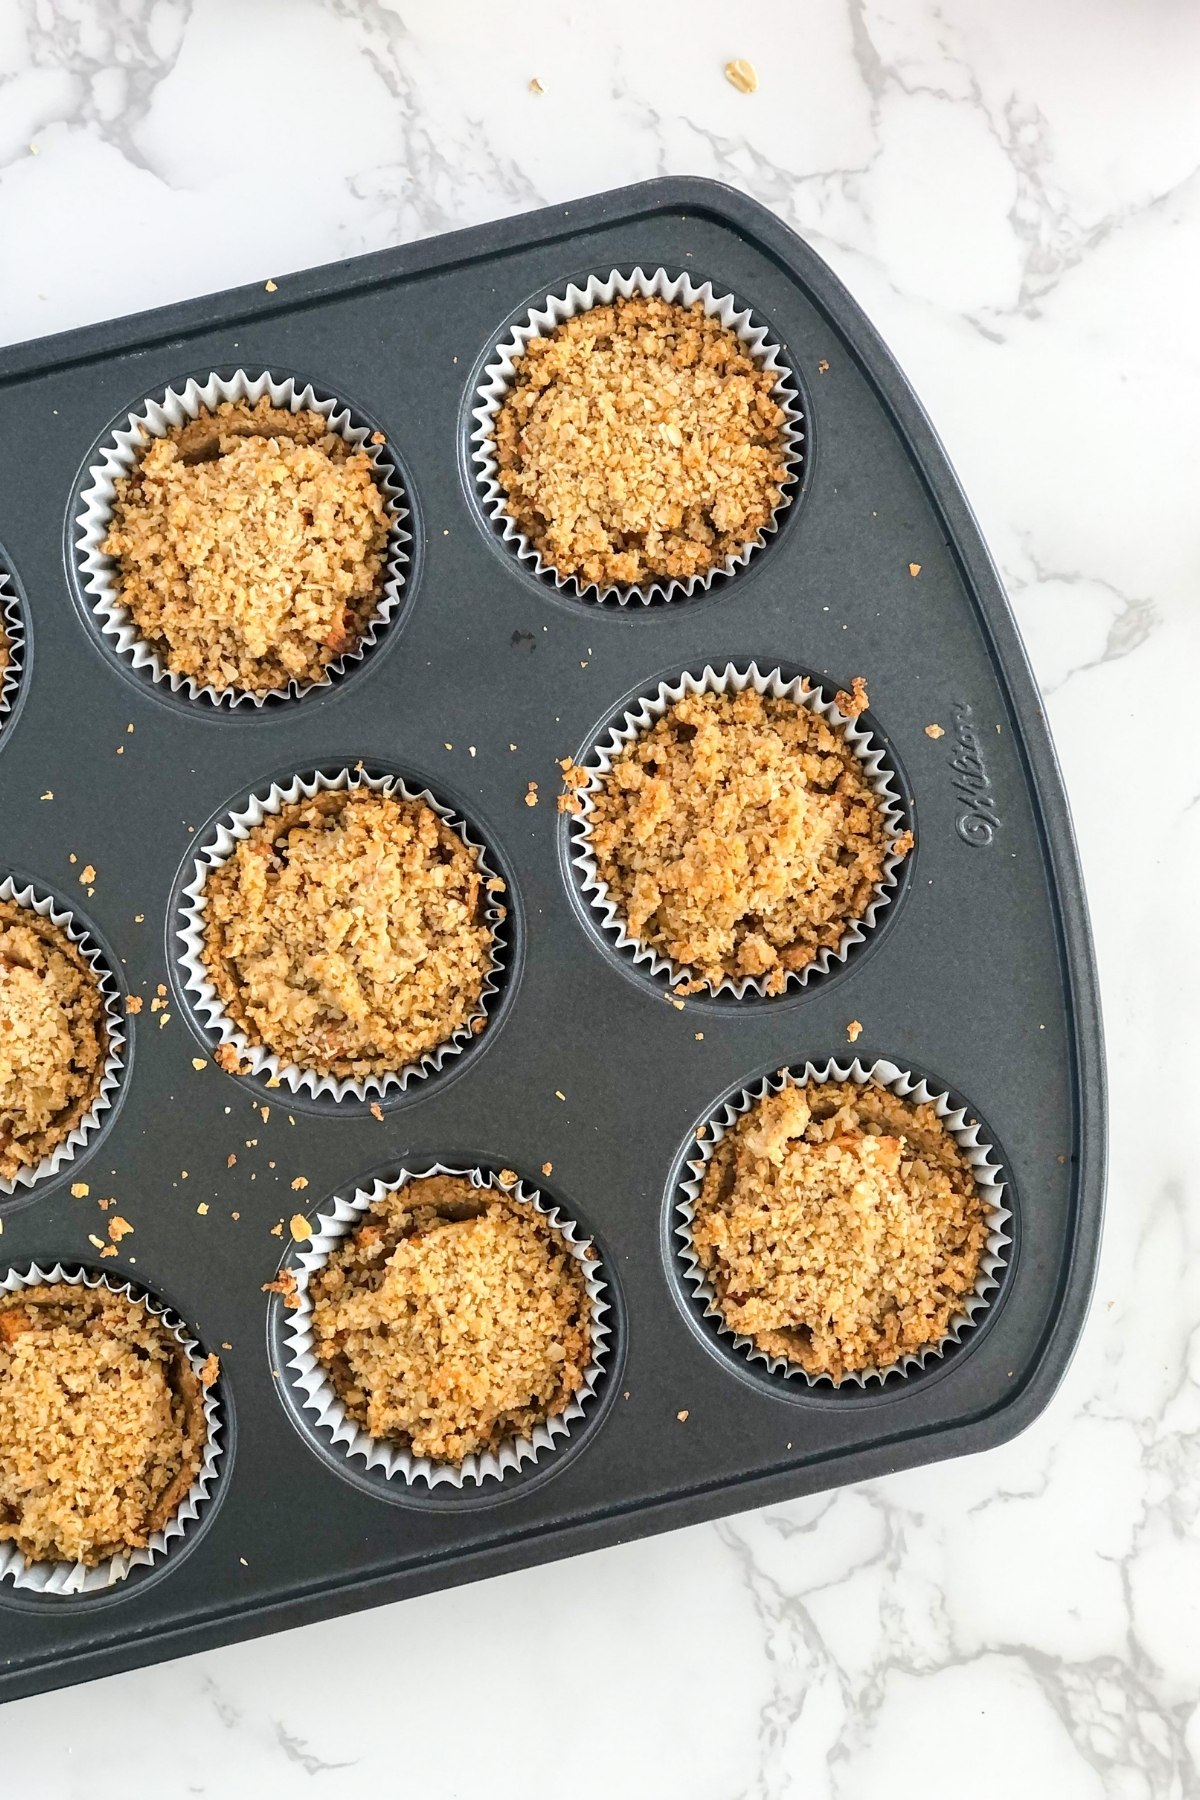 crumb topping on apple tarts in a muffin tin